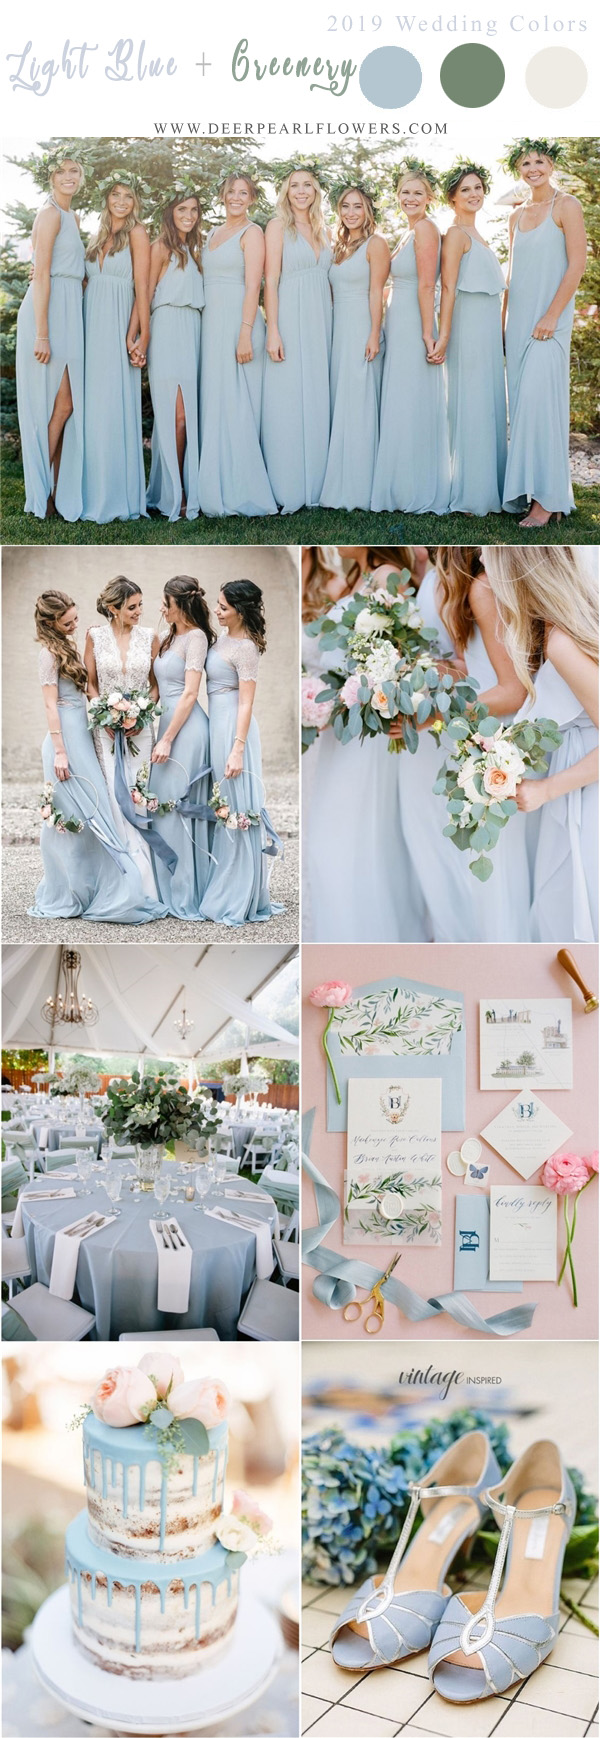 light blue and greenery wedding color ideas